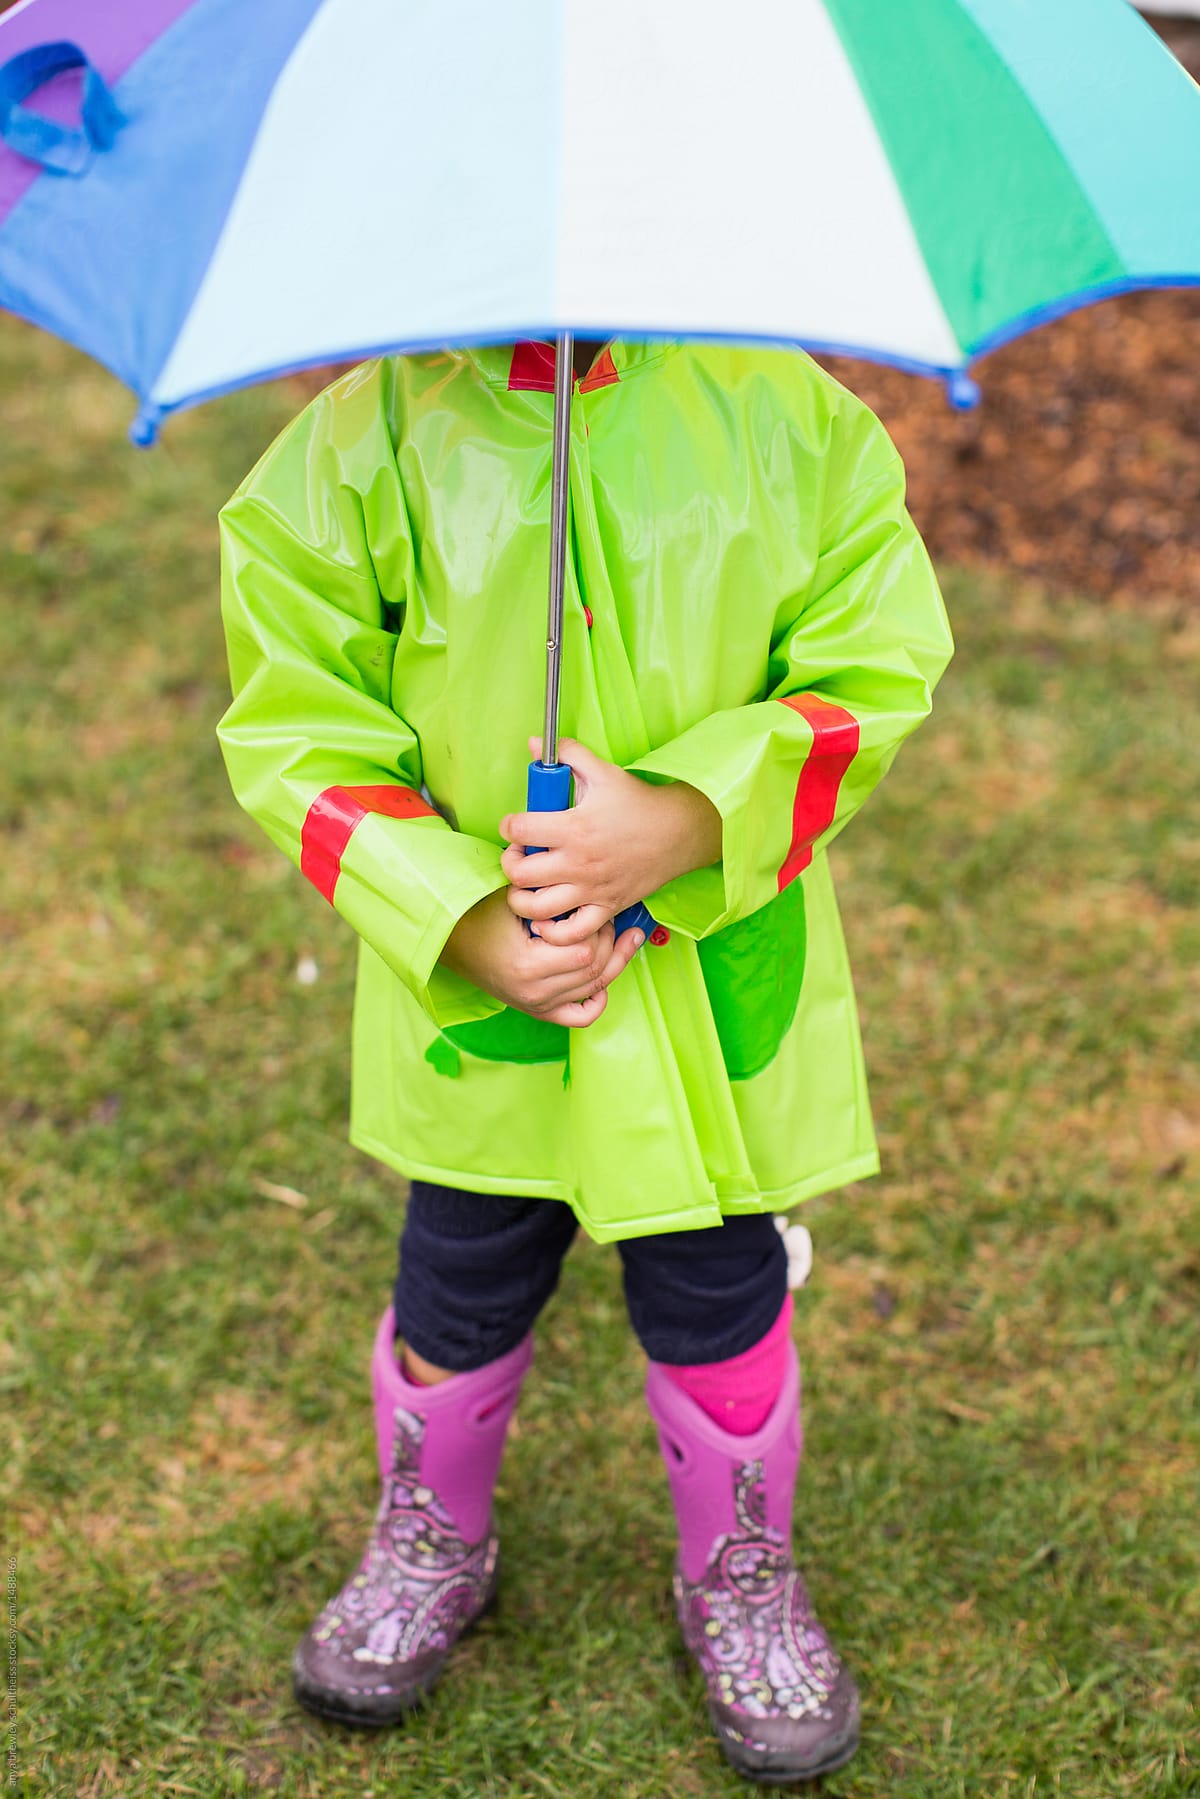 A young child in a raincoat holding a rainbow umbrella